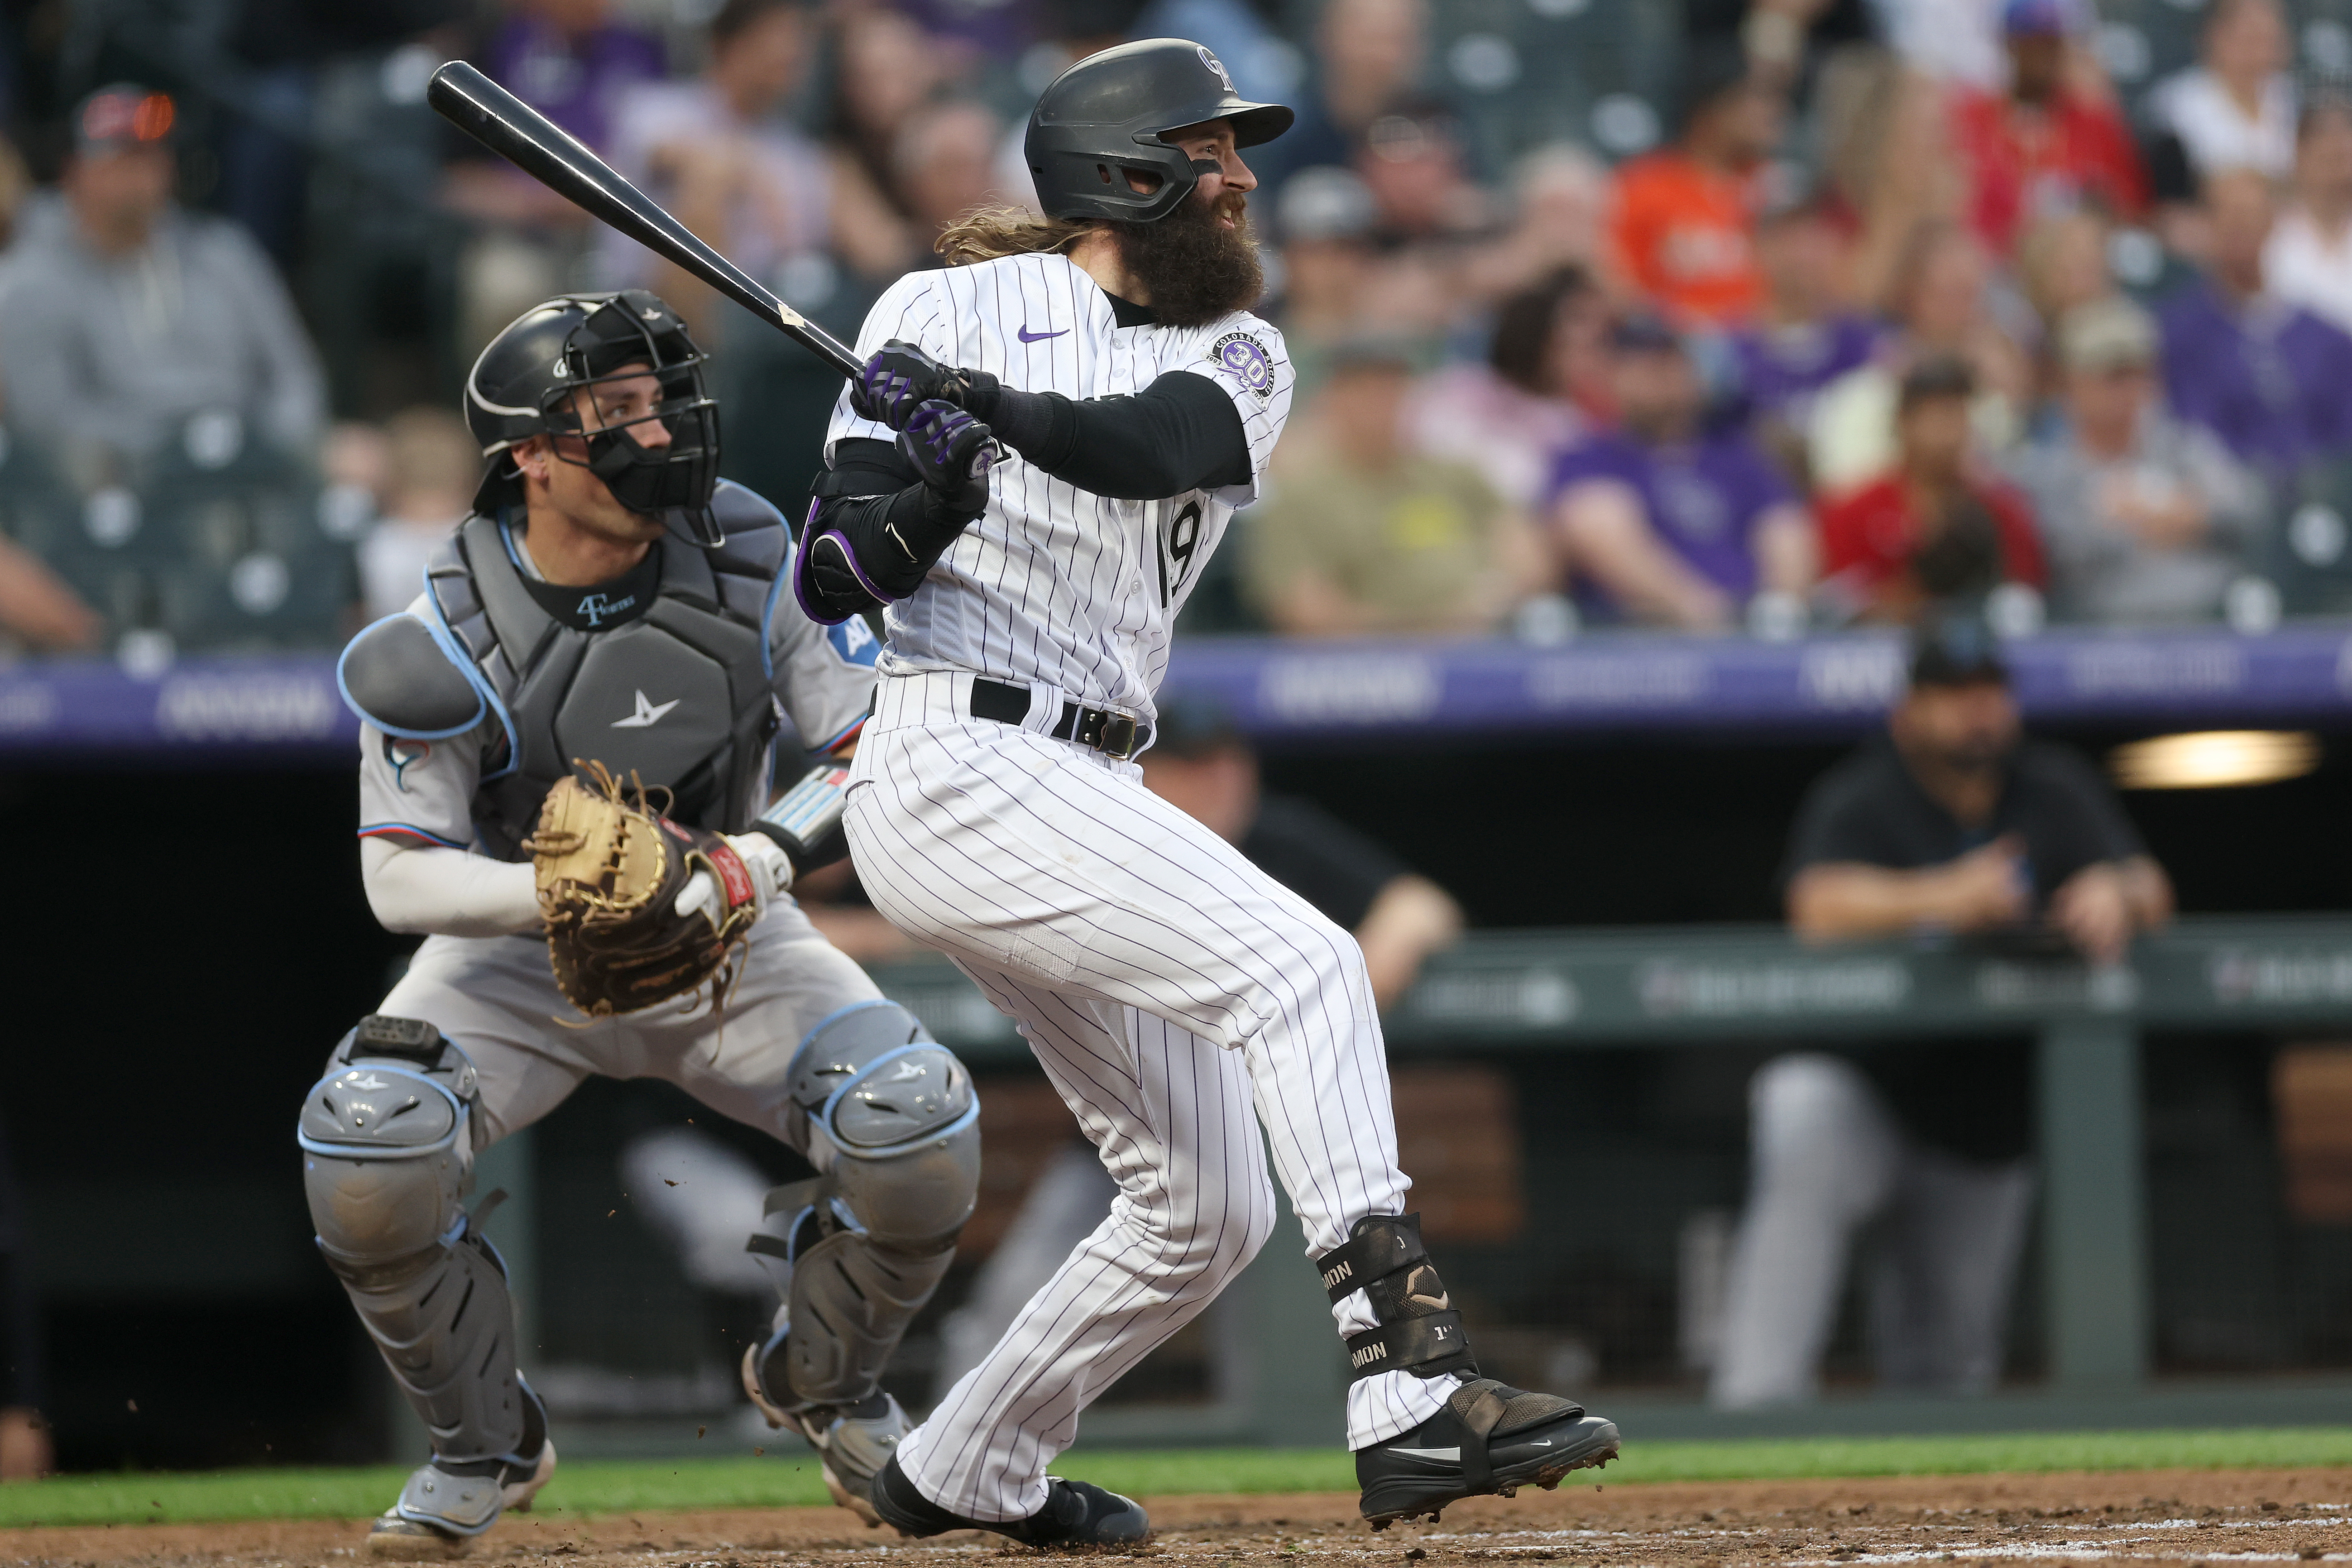 Charlie Blackmon injury update: Rehab stint to begin with Albuquerque, by  Colorado Rockies